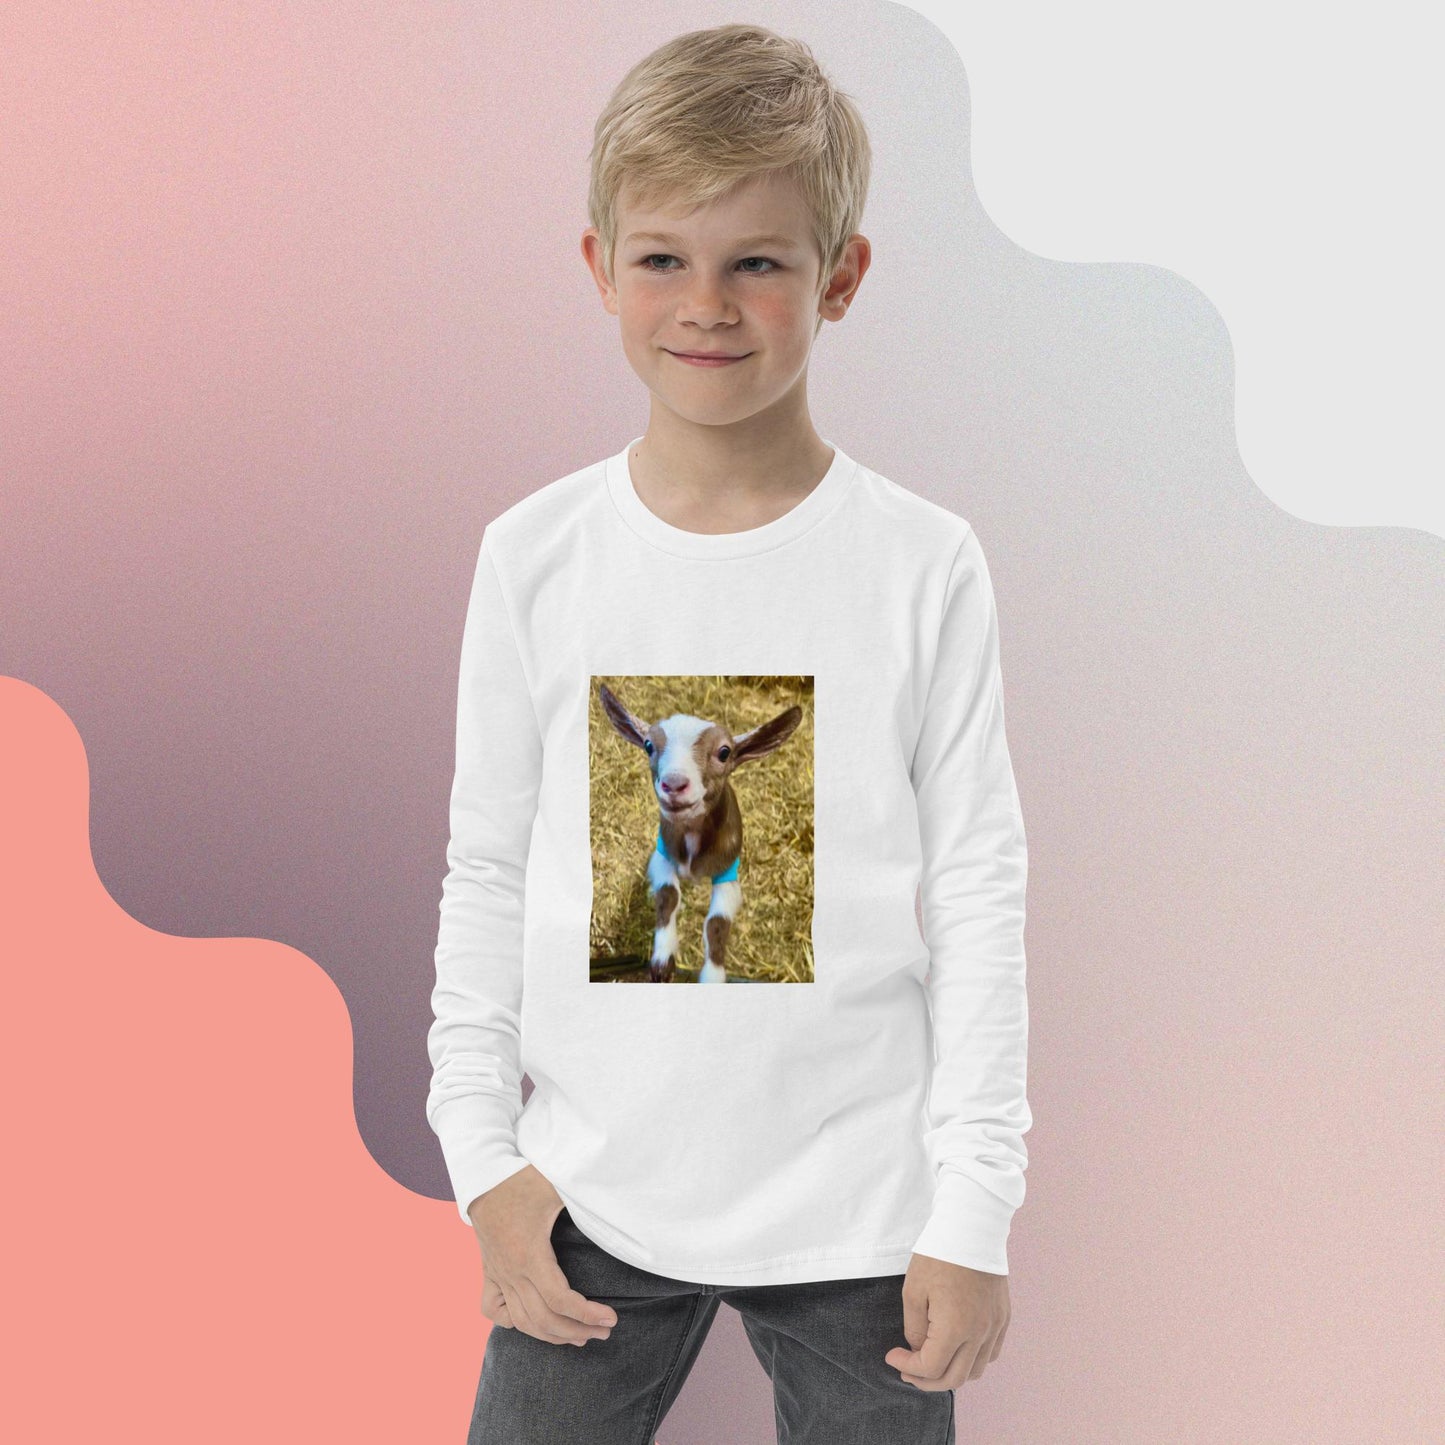 Youth long sleeve tee goat kid smiling